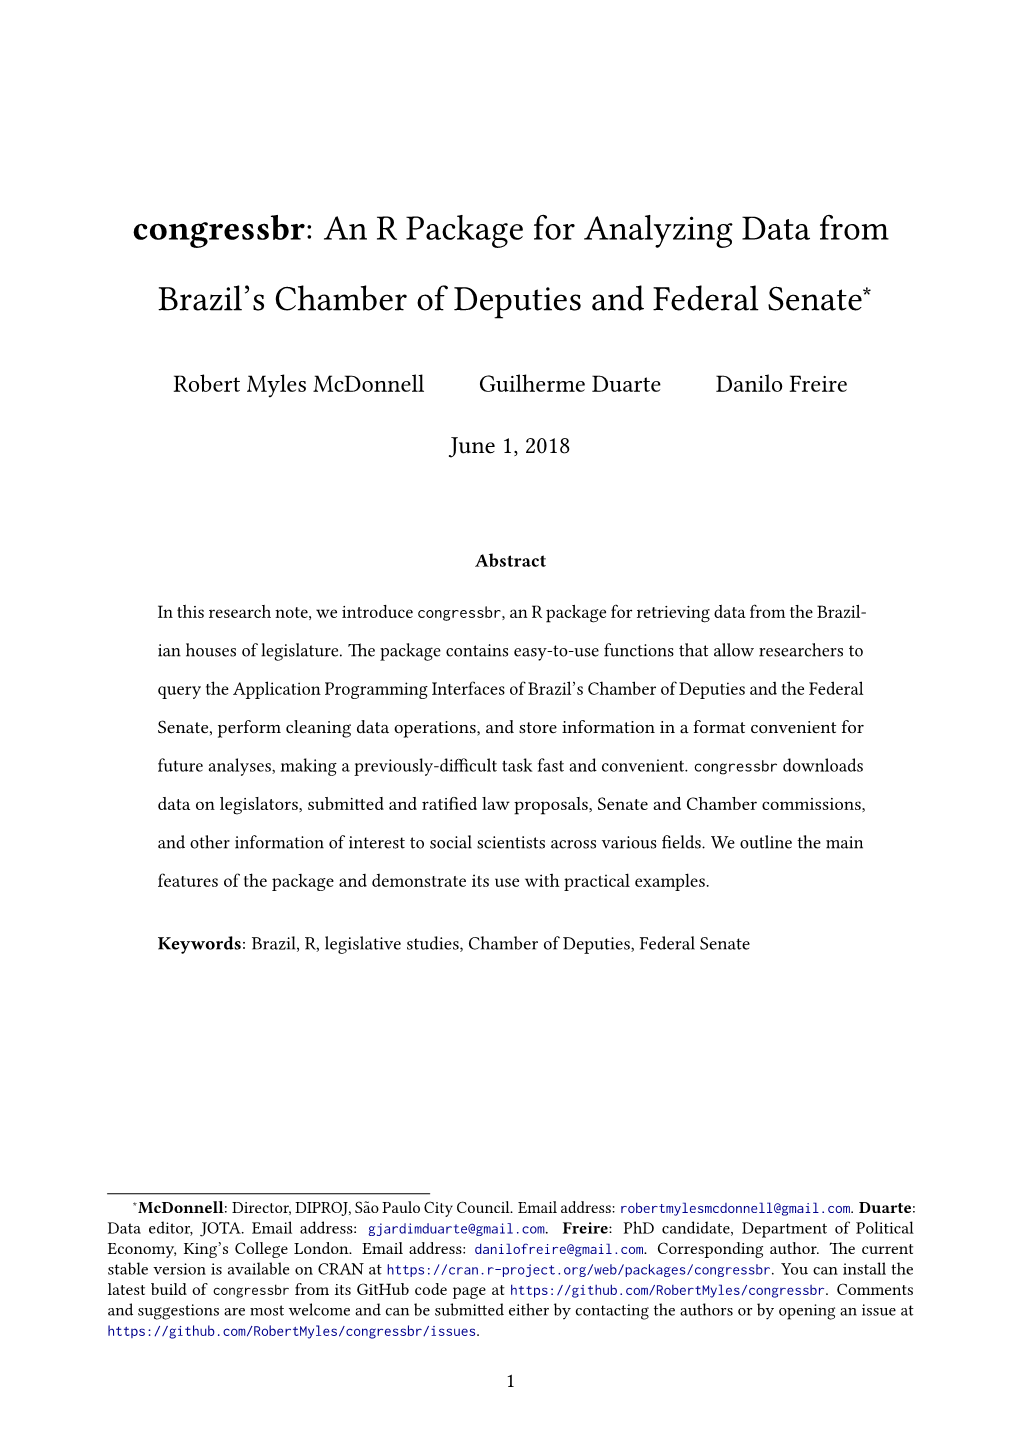 An R Package for Analyzing Data from Brazil's Chamber Of